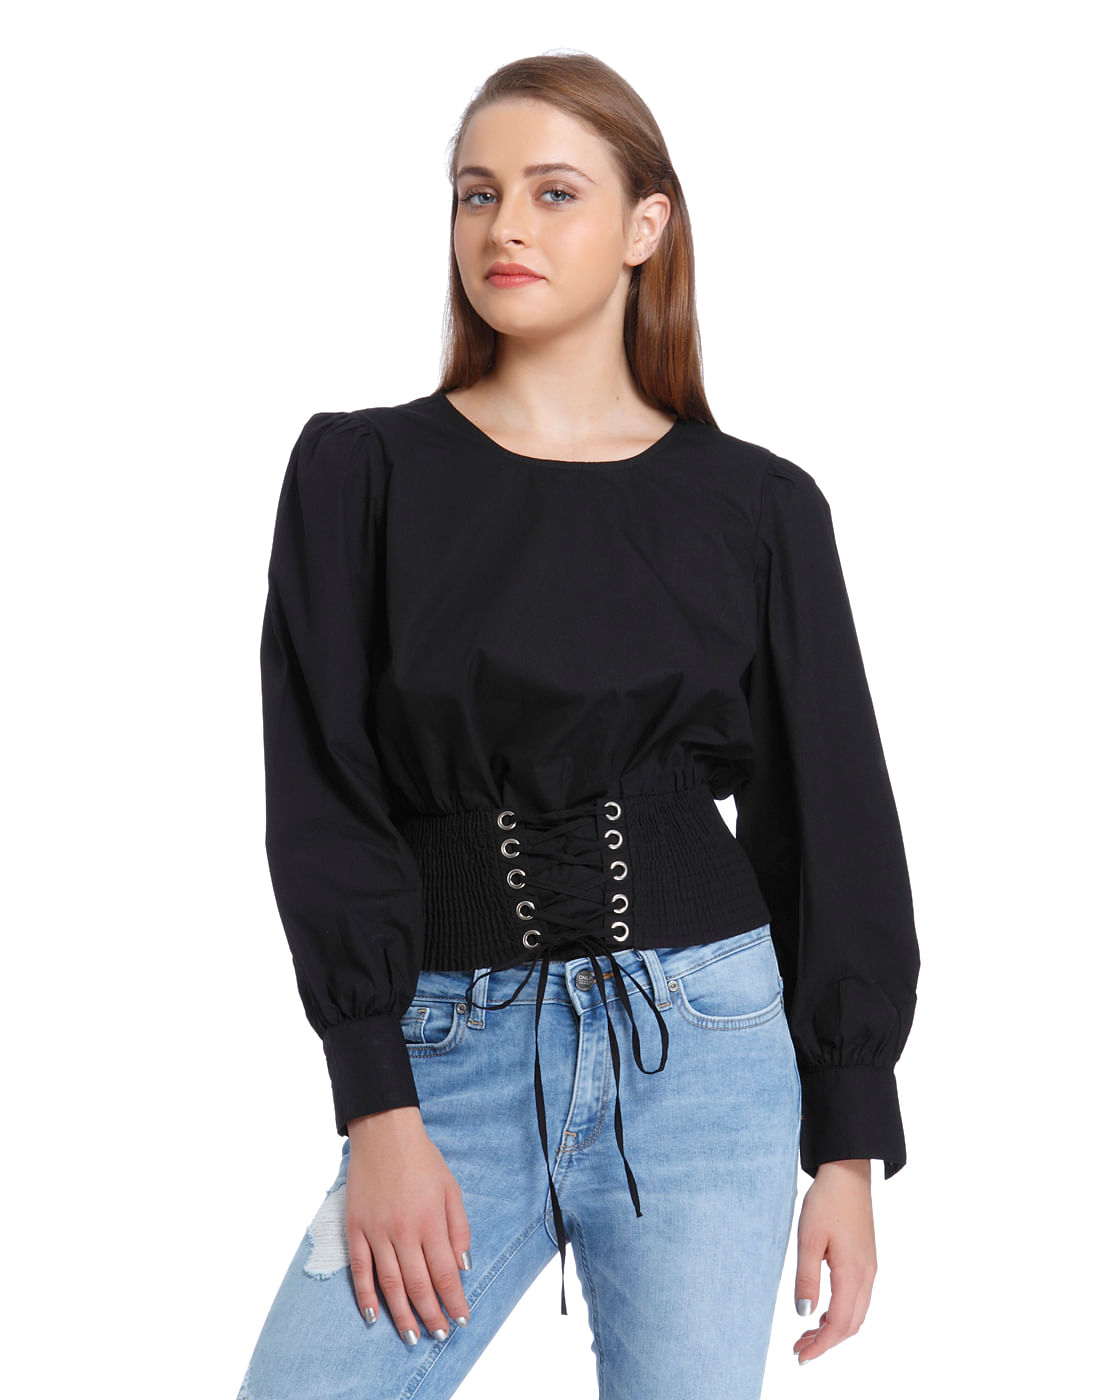 Buy Girls Black Lace Up Top online | ONLY